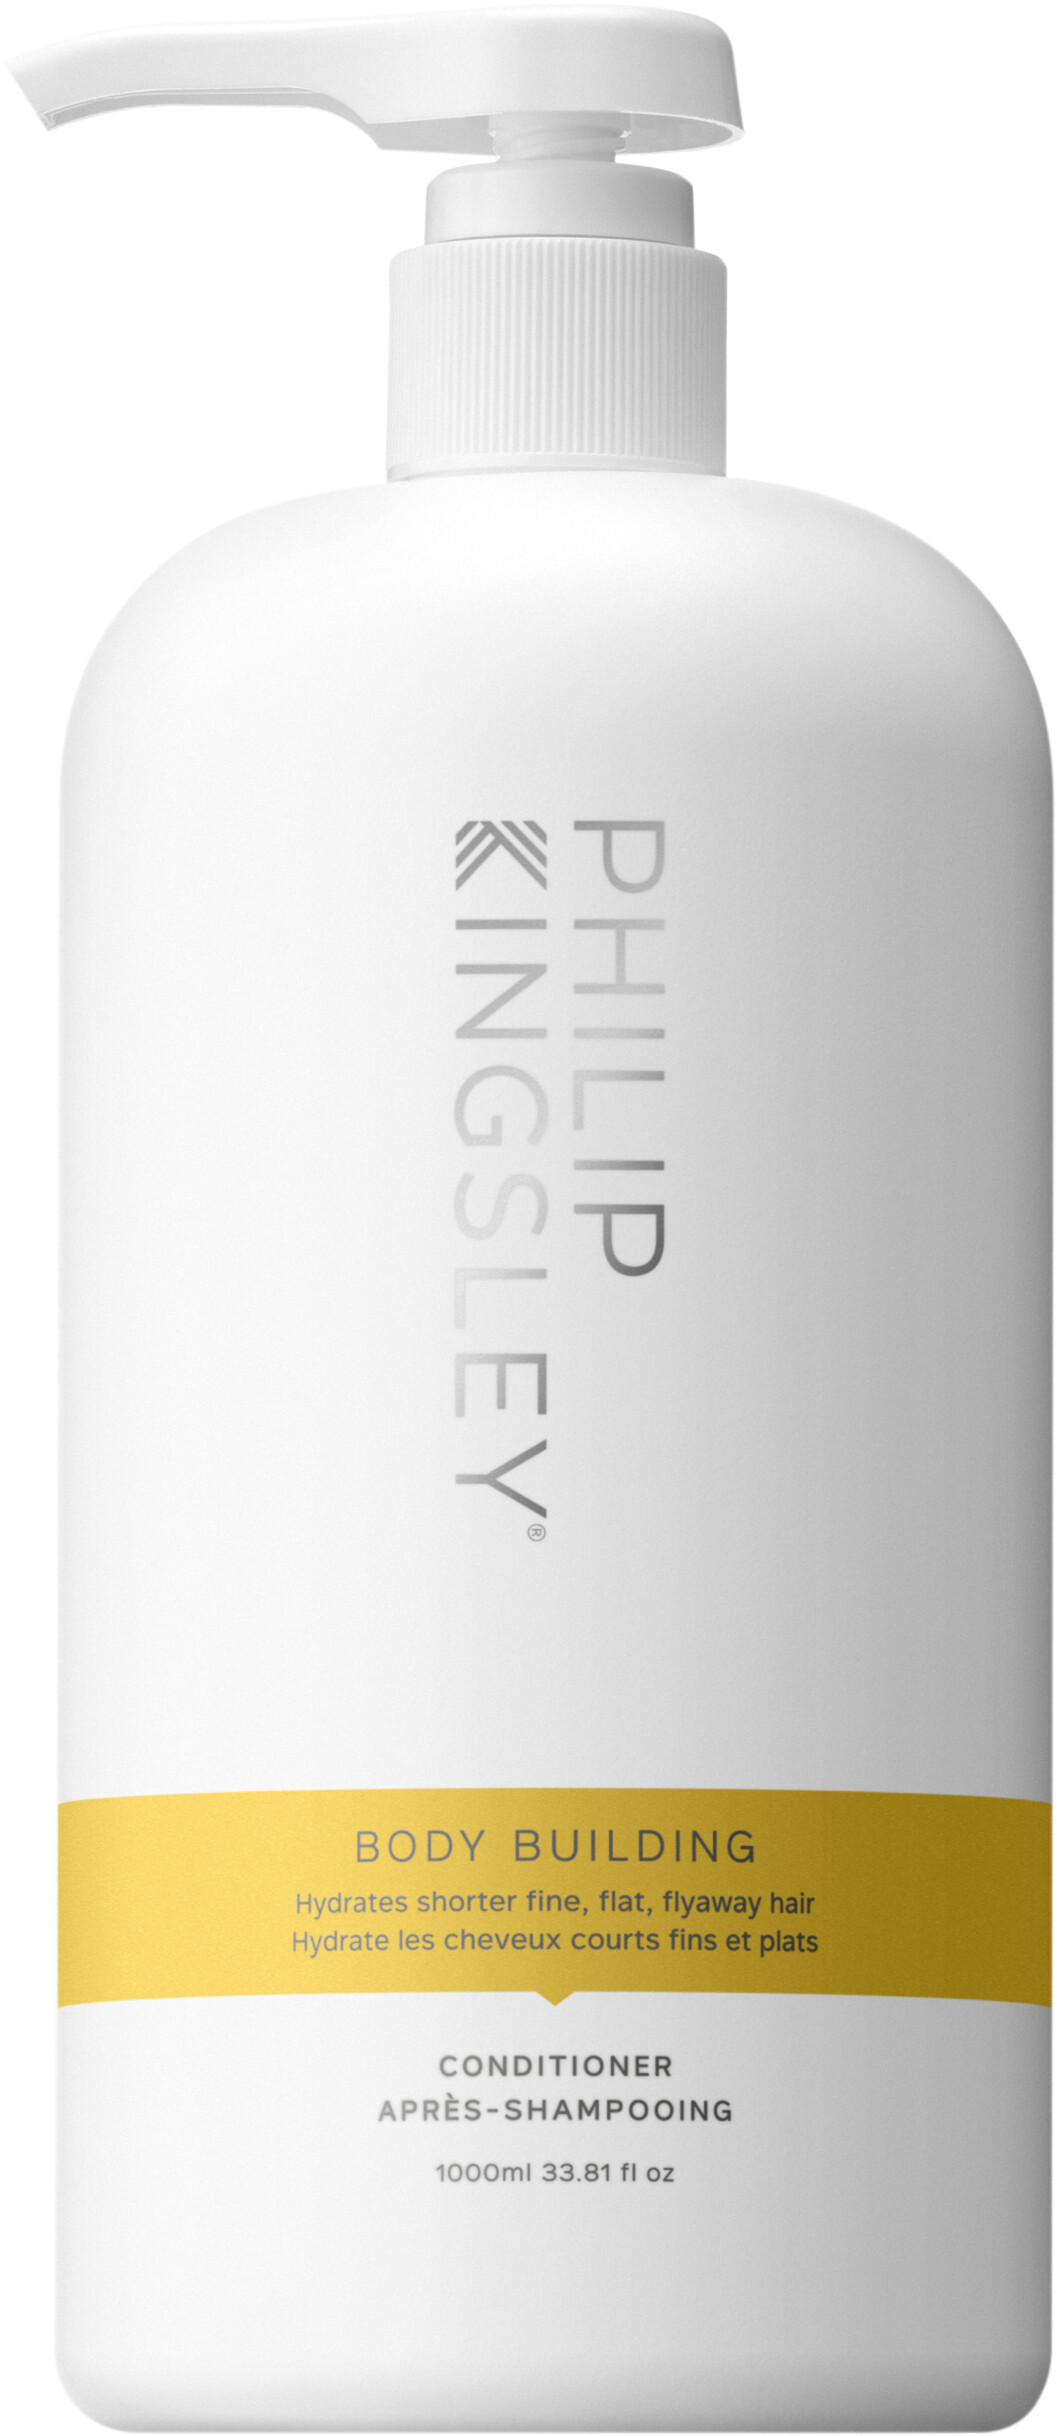 Philip Kingsley Body Building Weightless Conditioner 1 litre